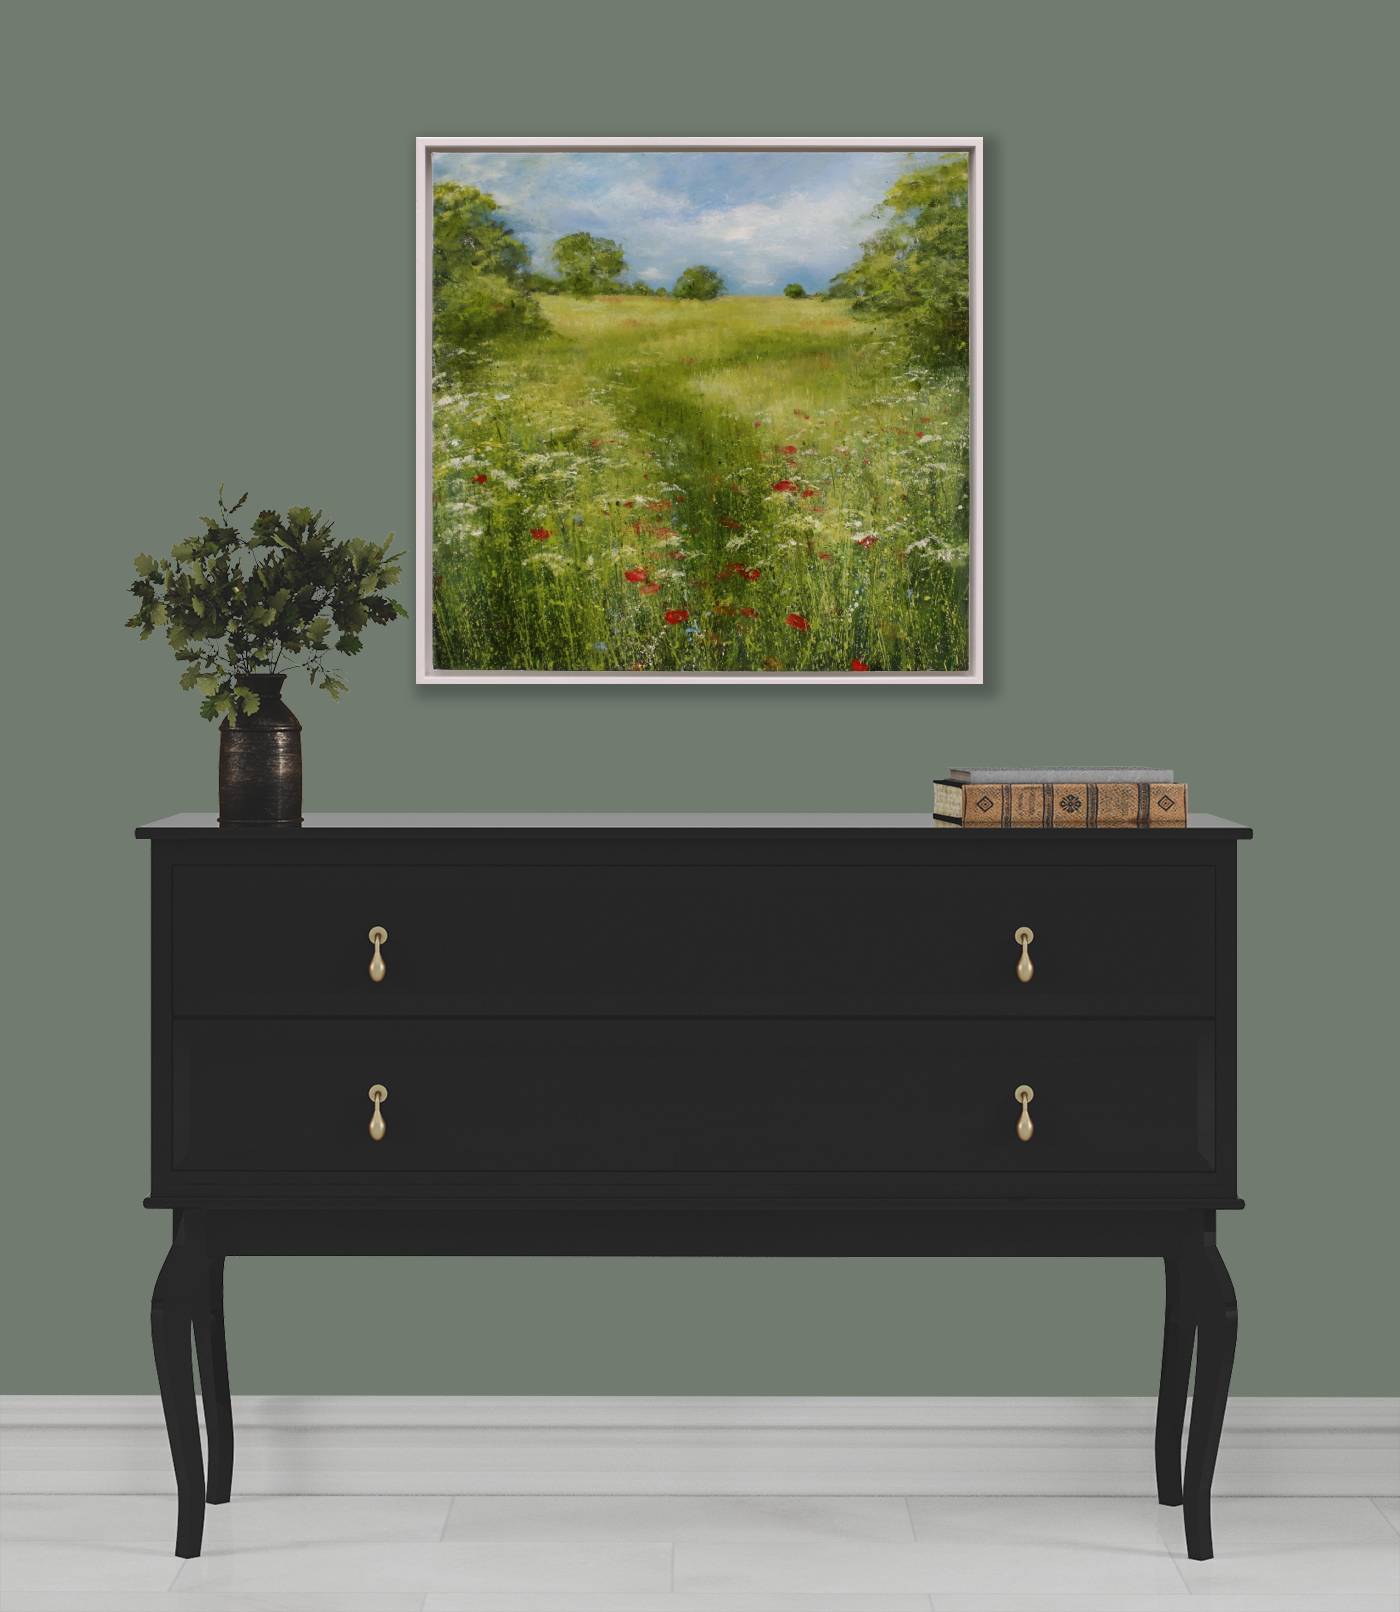 Poppies In The Meadow 81x81cm Framed Oil On Canvas.JPG Inroom